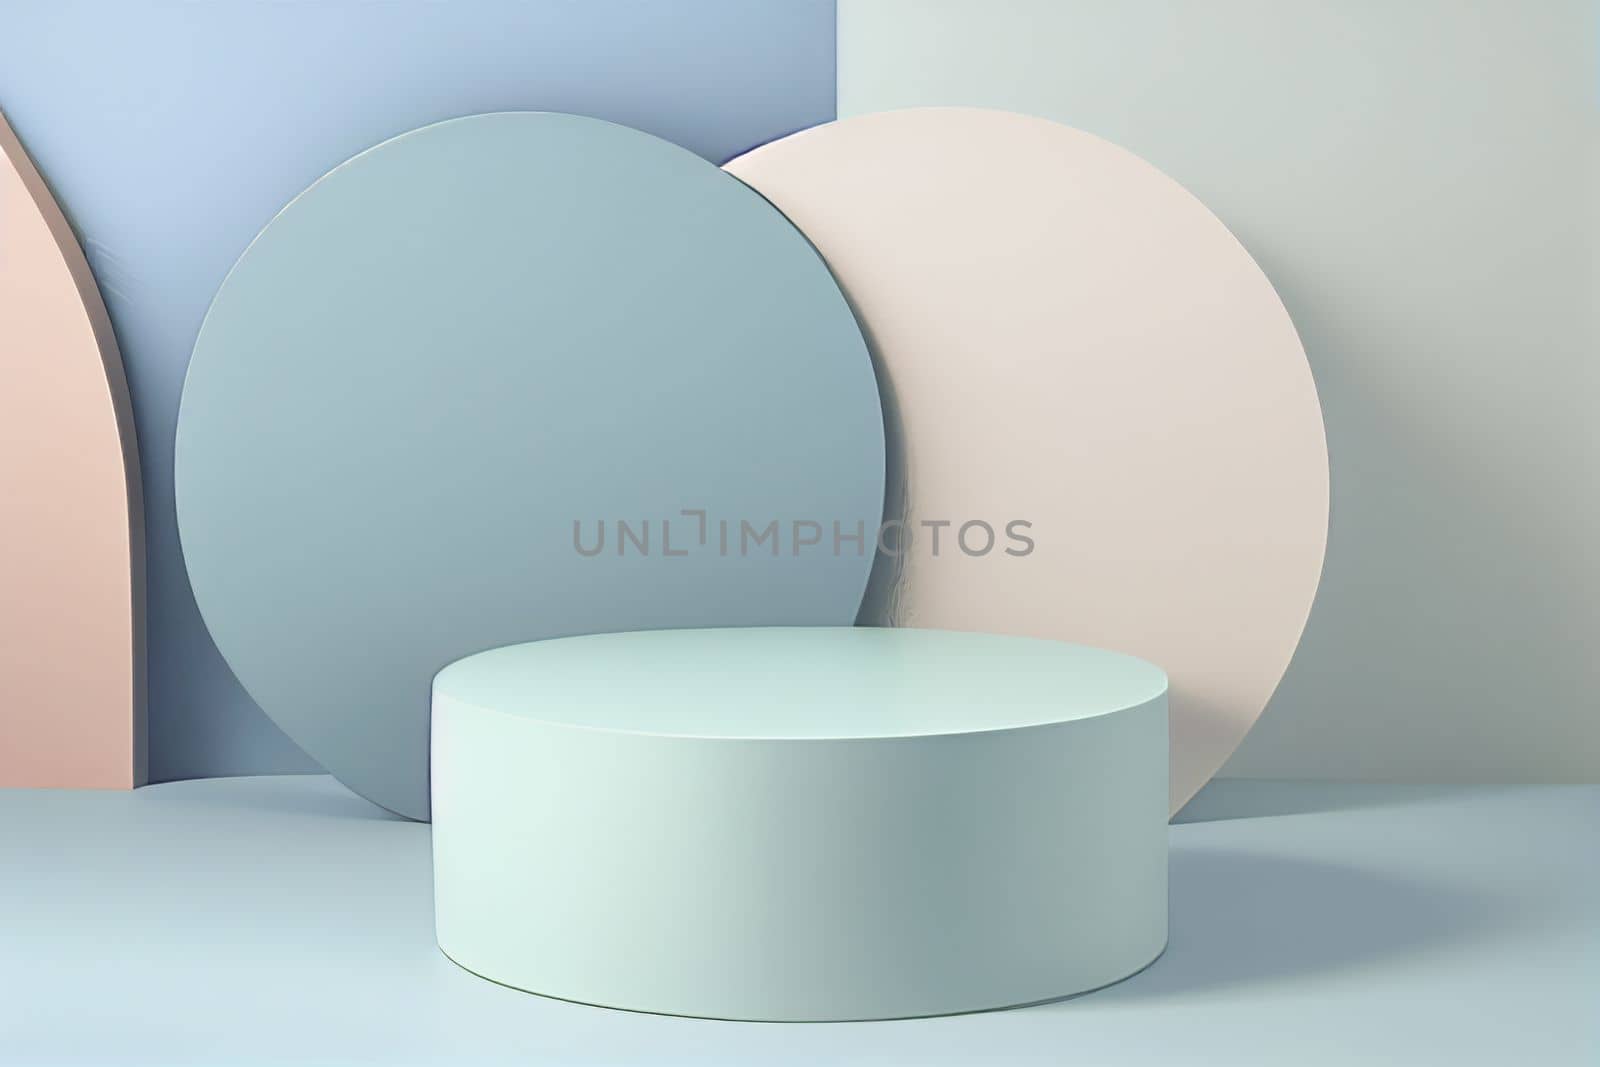 Pedestal podium with rounded corners in blue and white. Platform with geometric shapes. Scene of a minimalist wall in blue. Design of abstract in pastel colors. 